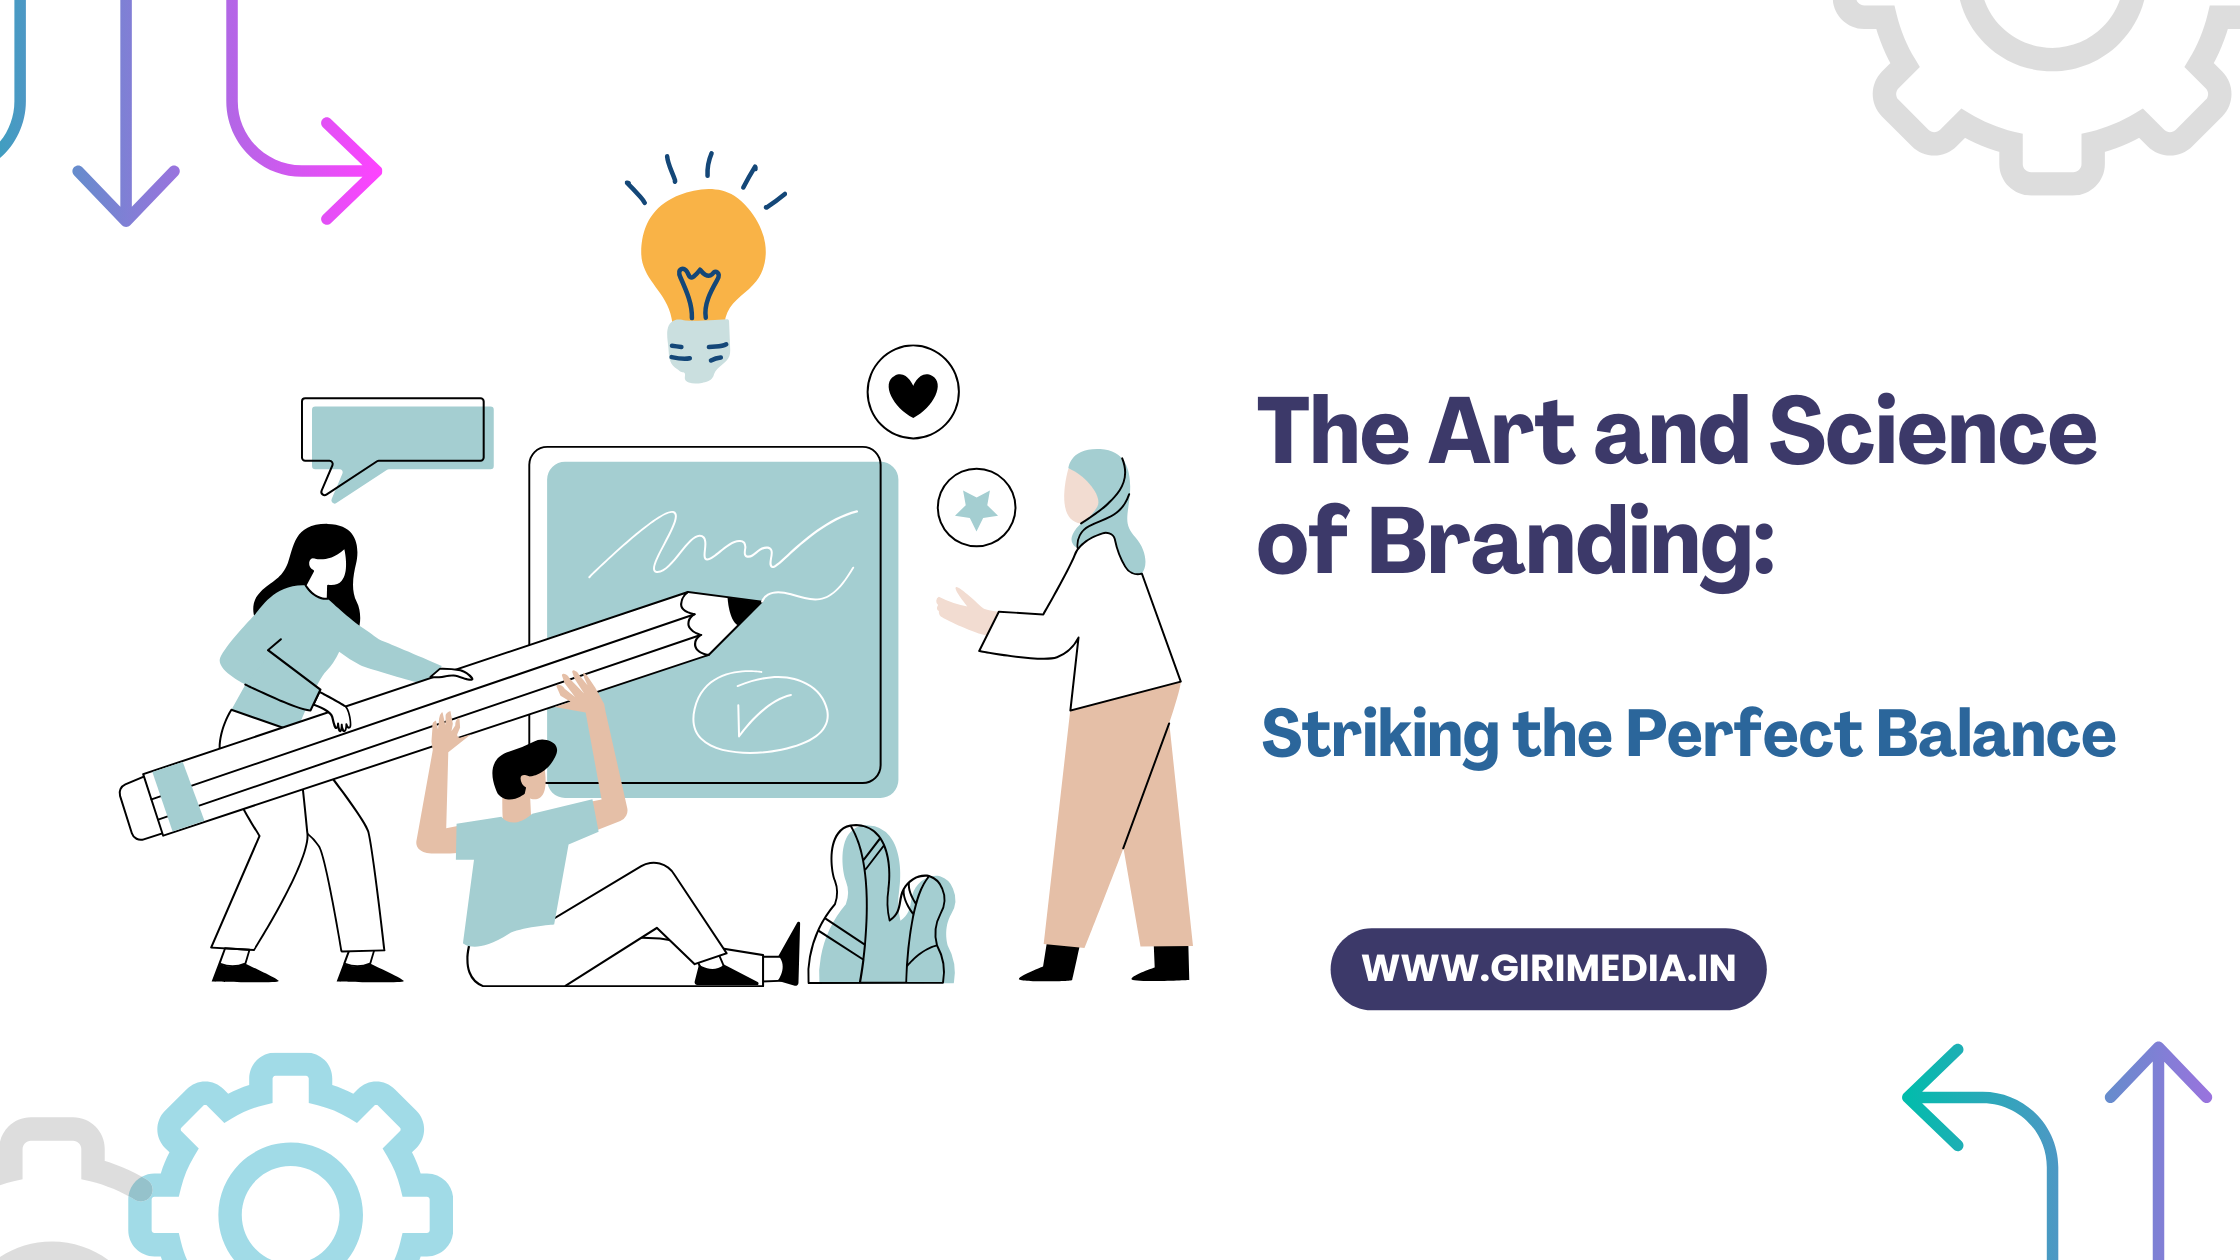 The Art and Science of Branding: